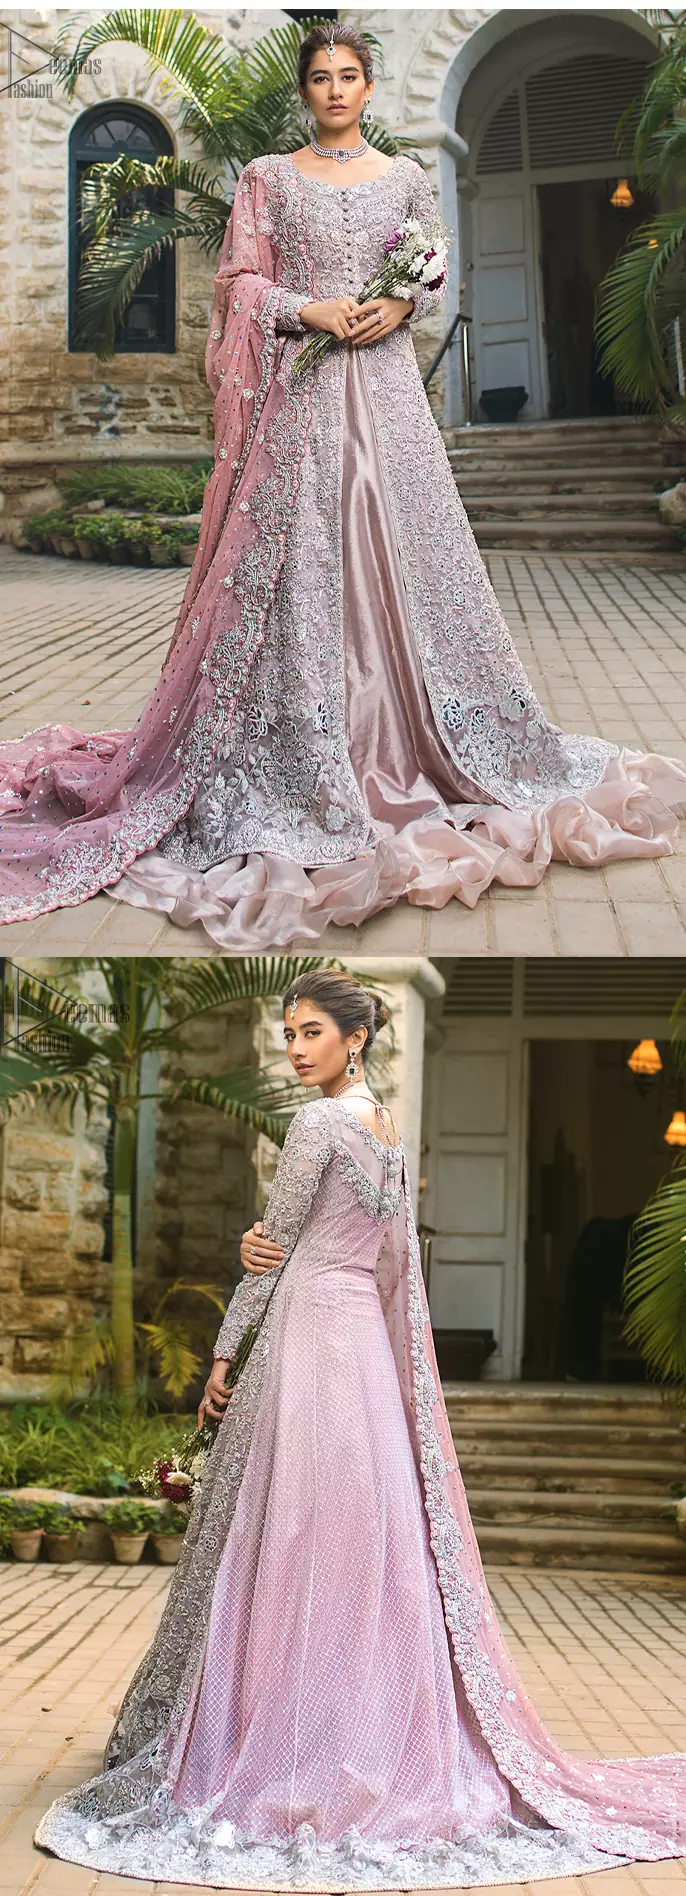 Pink Front Open Gown - Ruffled Sharara, Pair it up with a pink inner maxi and ruffled sharara gives the perfect ending to the outfit. The dupatta incorporates beautifully designed borders on all four sides, focusing on the heavily embellished pallu borders to give it a perfect maharani look.